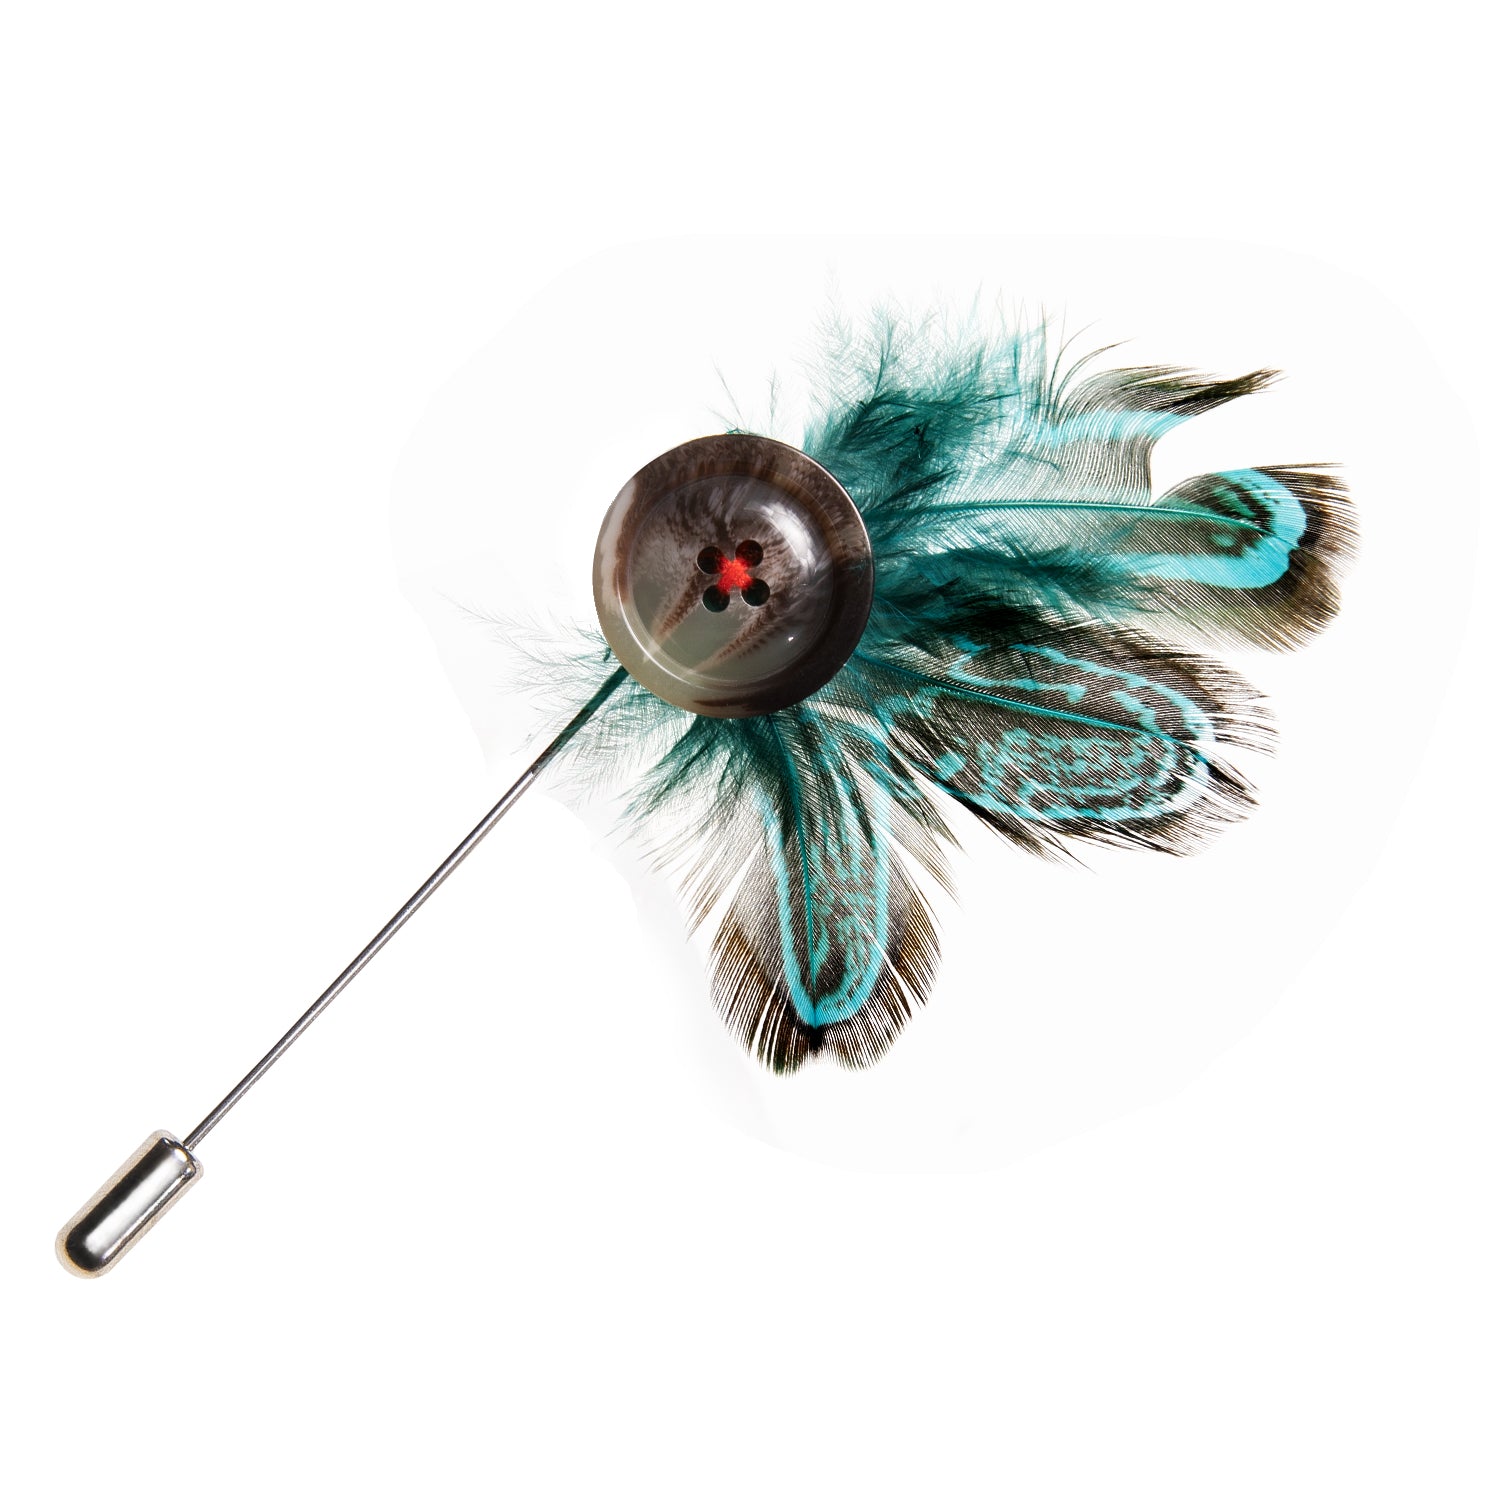 Barry.wang Men's Tie Accessories Novelty Green Feather Lapel Pin